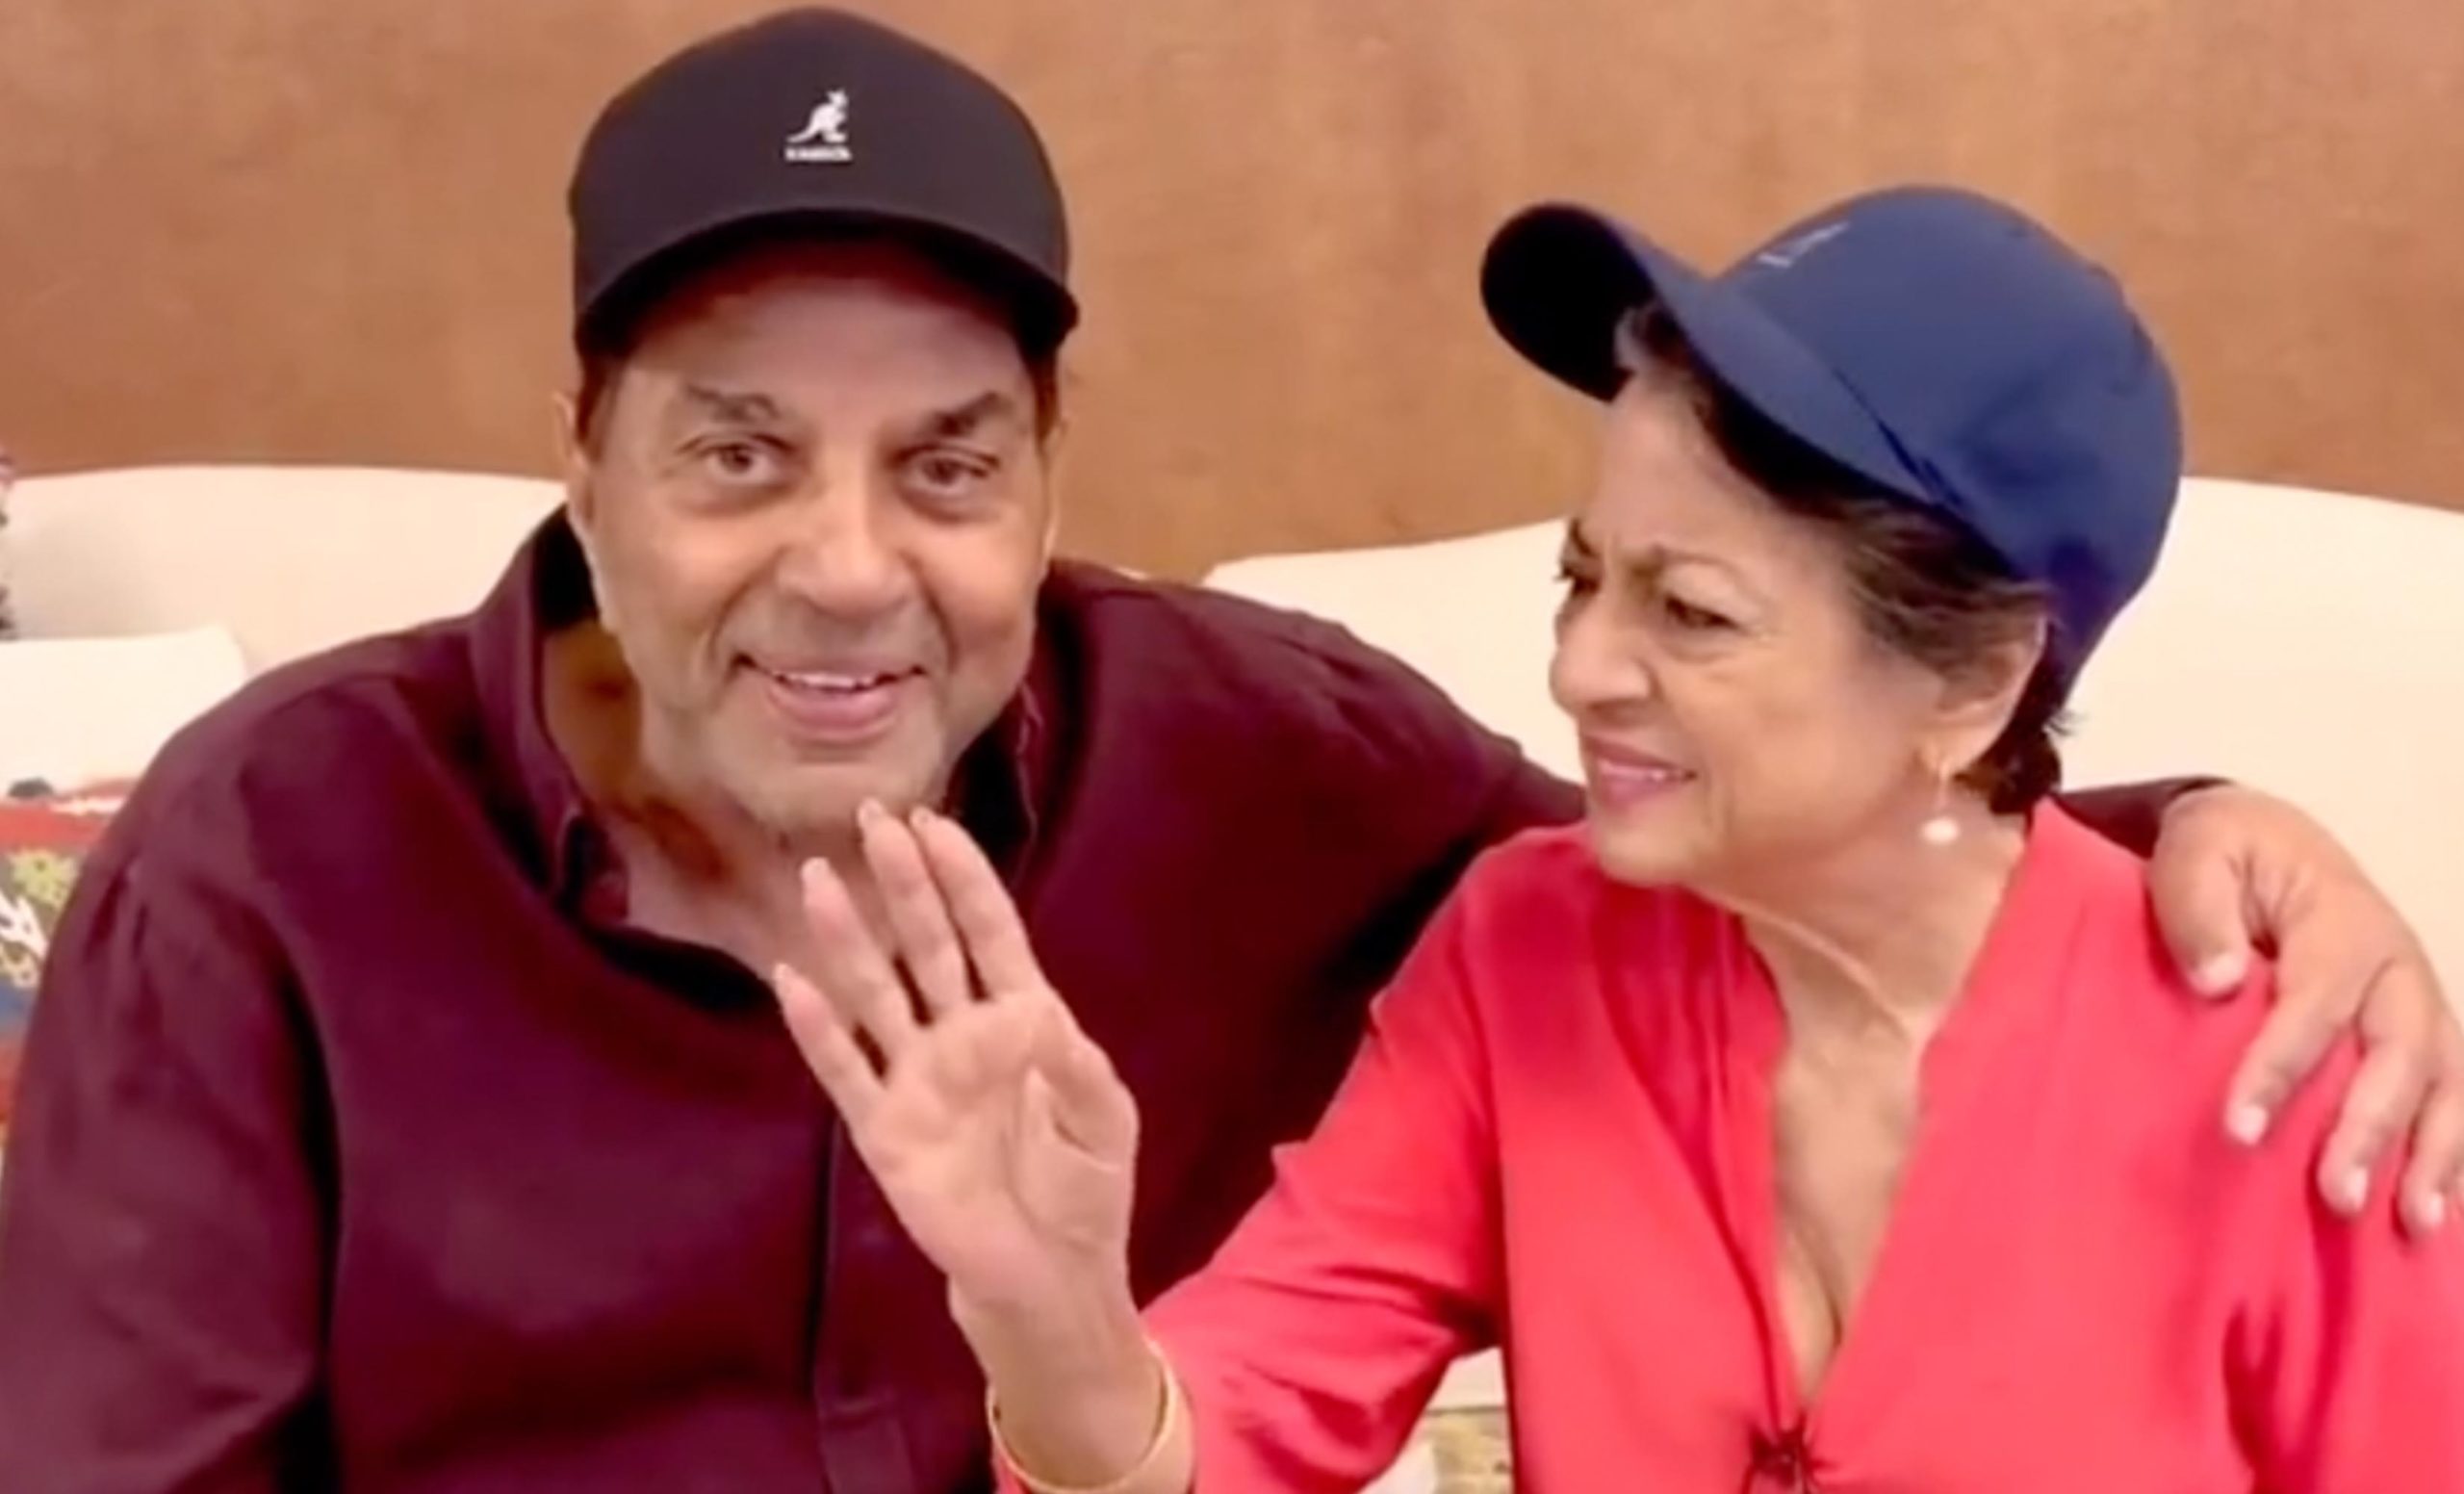 Dharmendra And Tanuja Reminisce About Their Golden Days And Late Actress Nutan In This Adorable Video